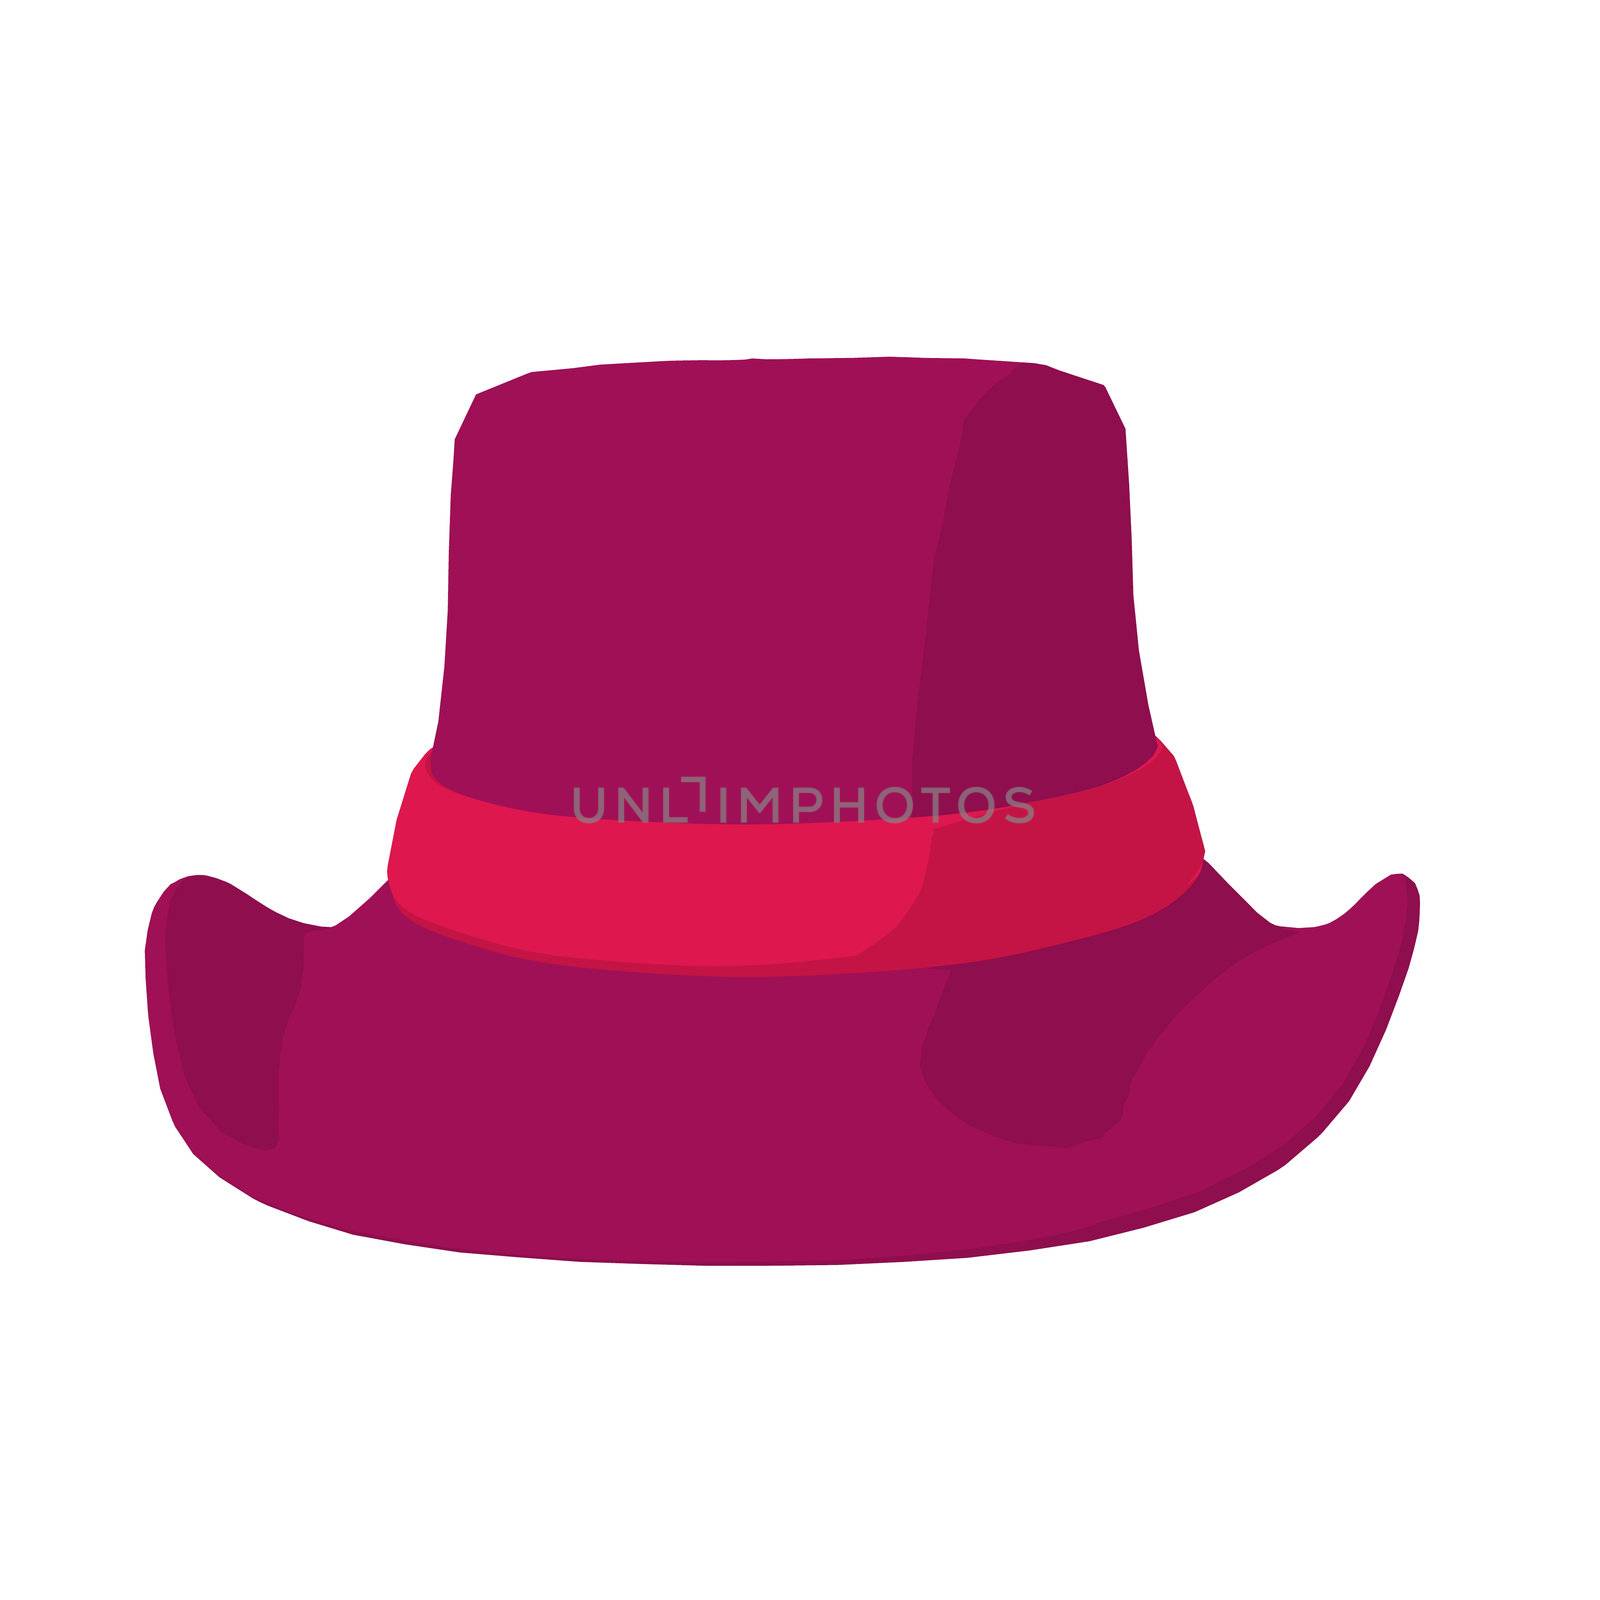 Fashion hat on a white background